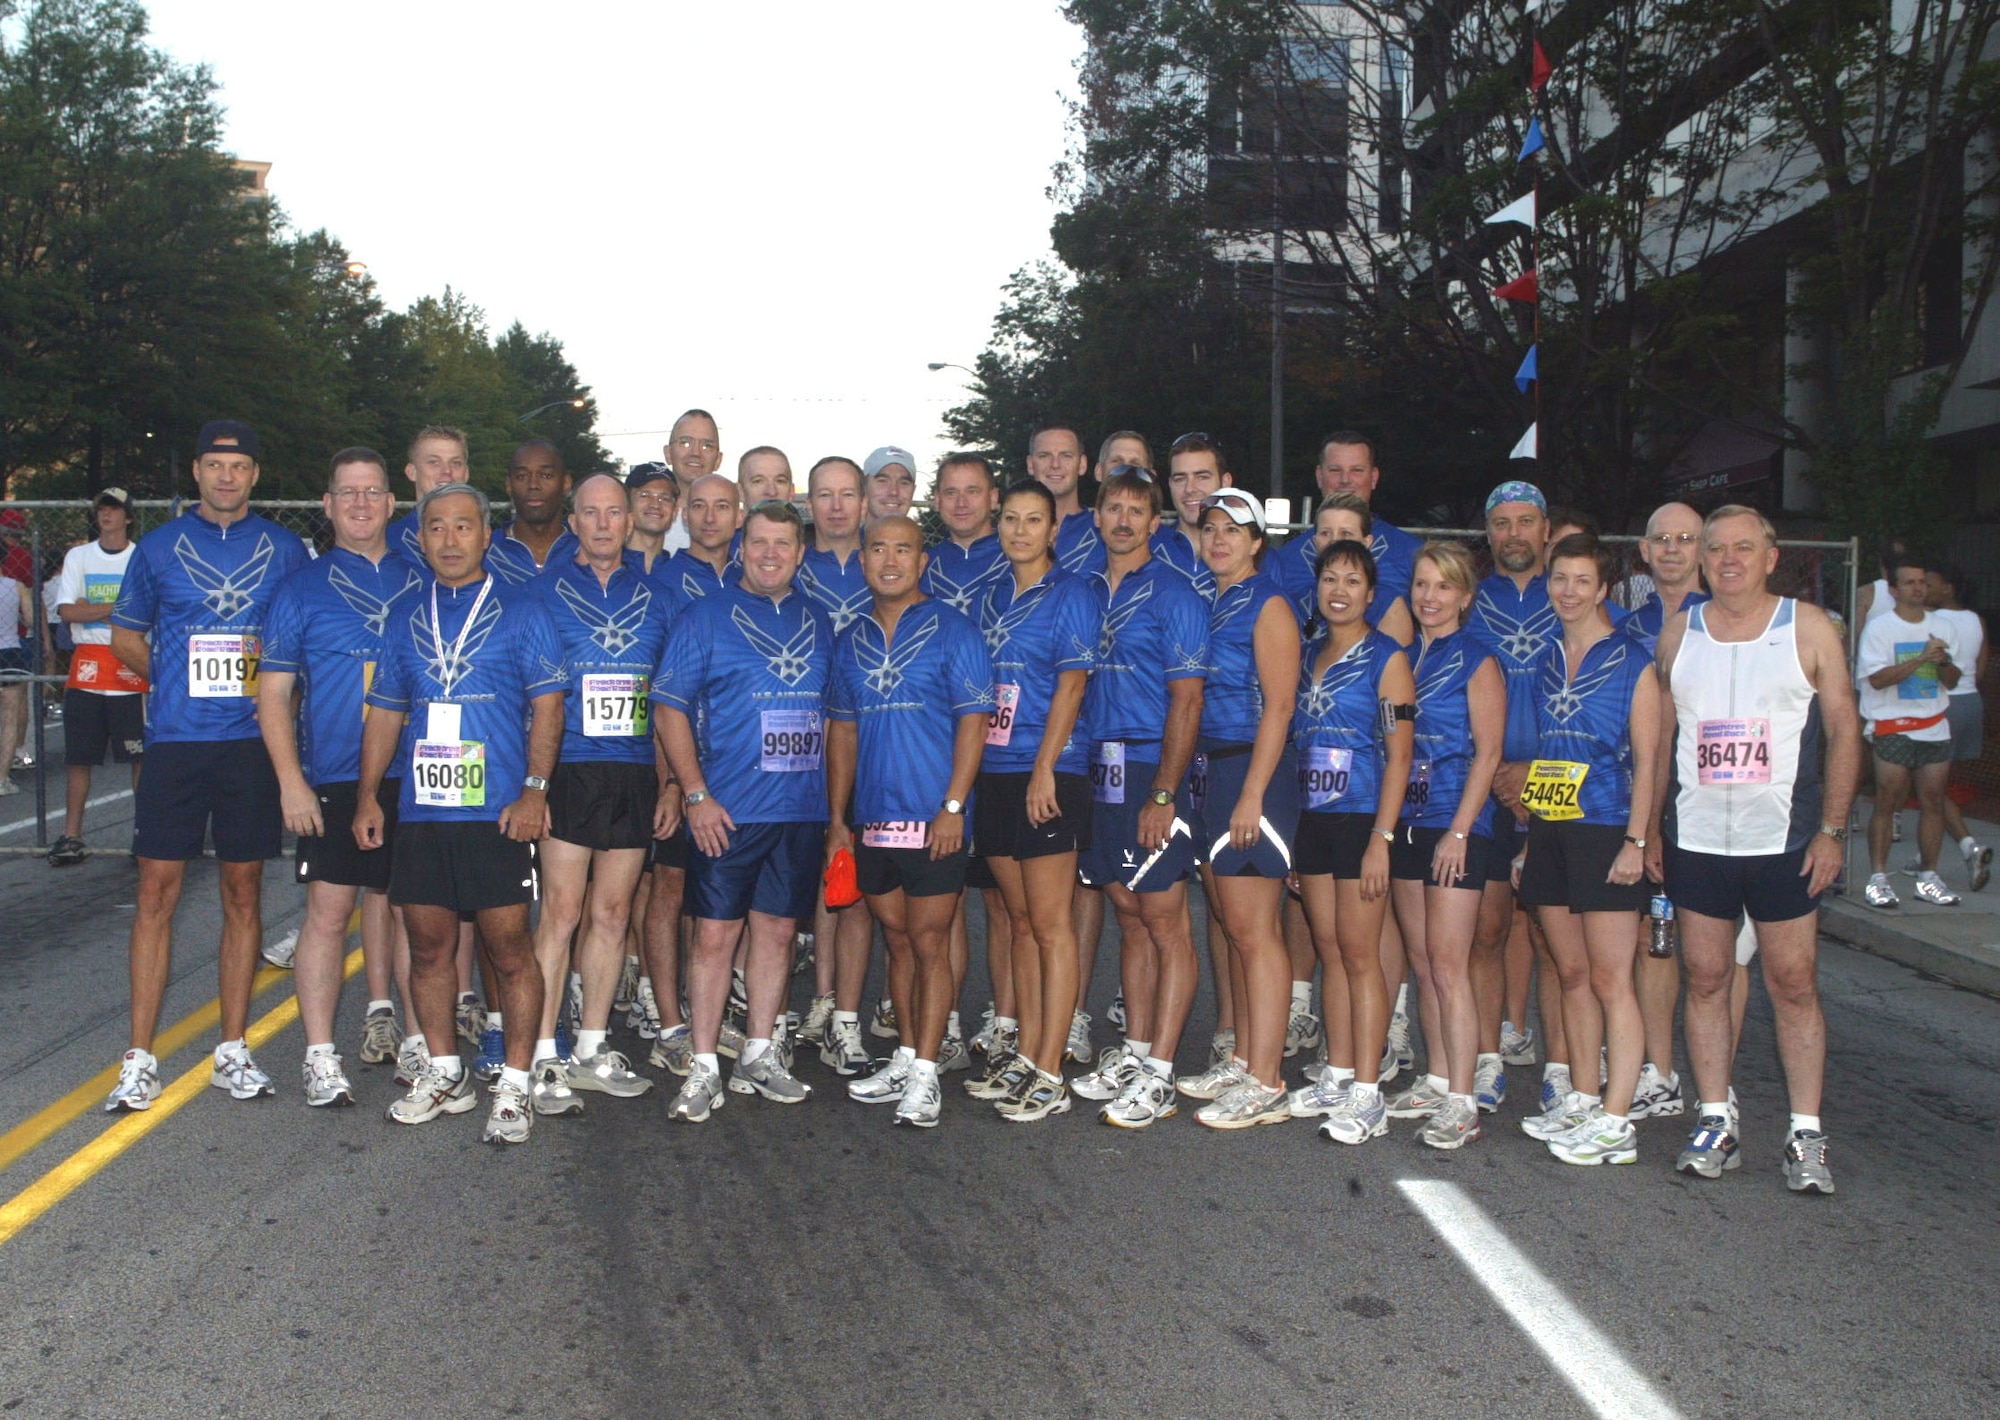 A contingent of Air Force members and volunteers from Dobbins Air Reserve Base, Ga., ran representing the Air Force in the annual Peachtree Road Race in downtown Atlanta July 4th. The event draws more than 75,000 applicants, 55,000 of whom are chosen to run. (U.S. Air Force photo/Don Peek)